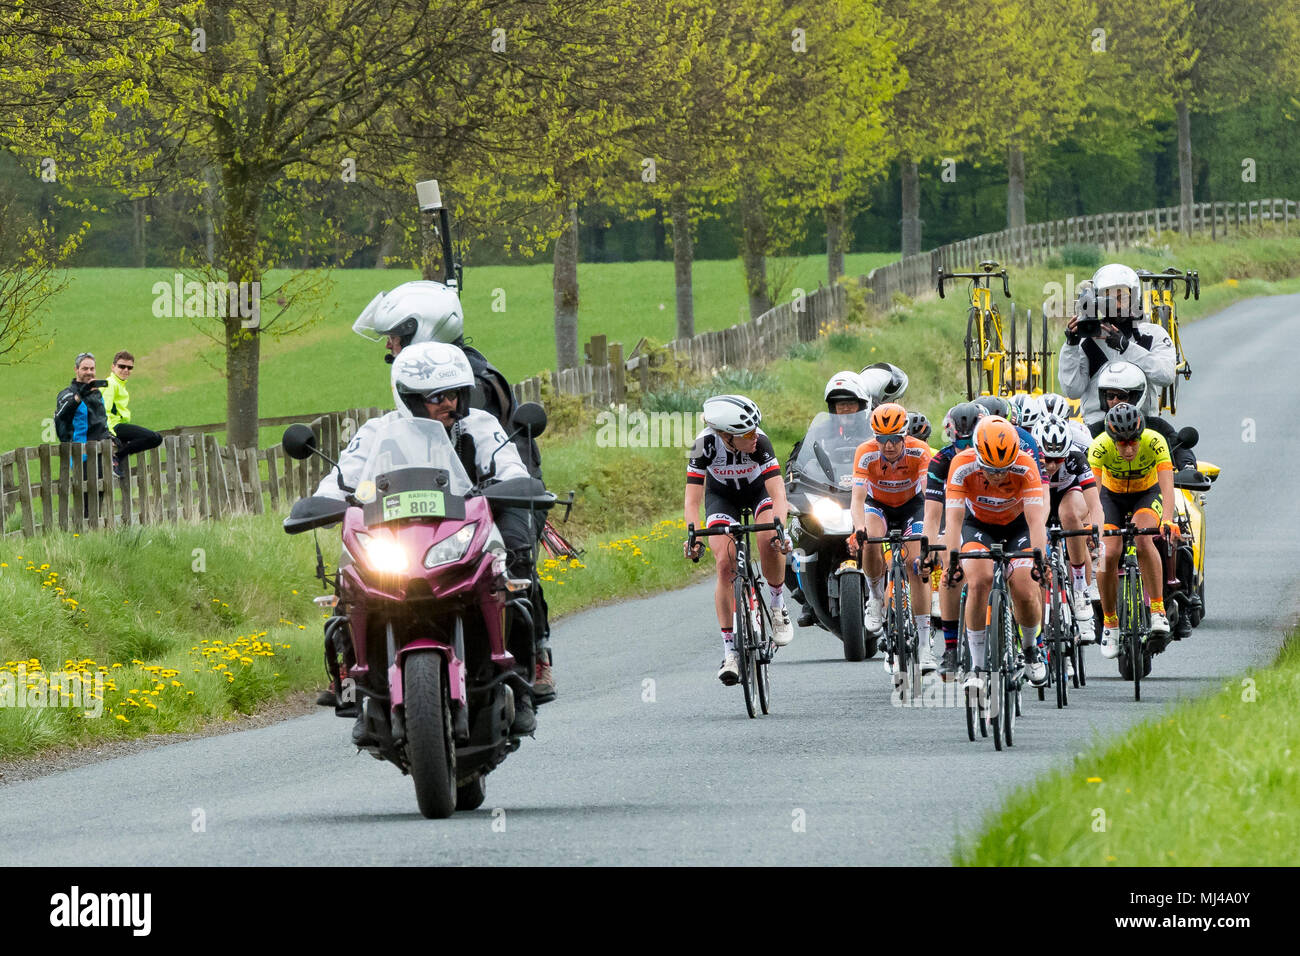 Near Denton, North Yorkshire, 4th May 2018. Group of female or women cyclists in the Asda Women's Tour de Yorkshire, racing past Denton Hall, on straight countryside lane near Ilkley, North Yorkshire, England, UK. TV camera crew on motor bikes in front & behind. 2 spectators watch from the roadside. Credit: Ian Lamond/Alamy Live News Stock Photo